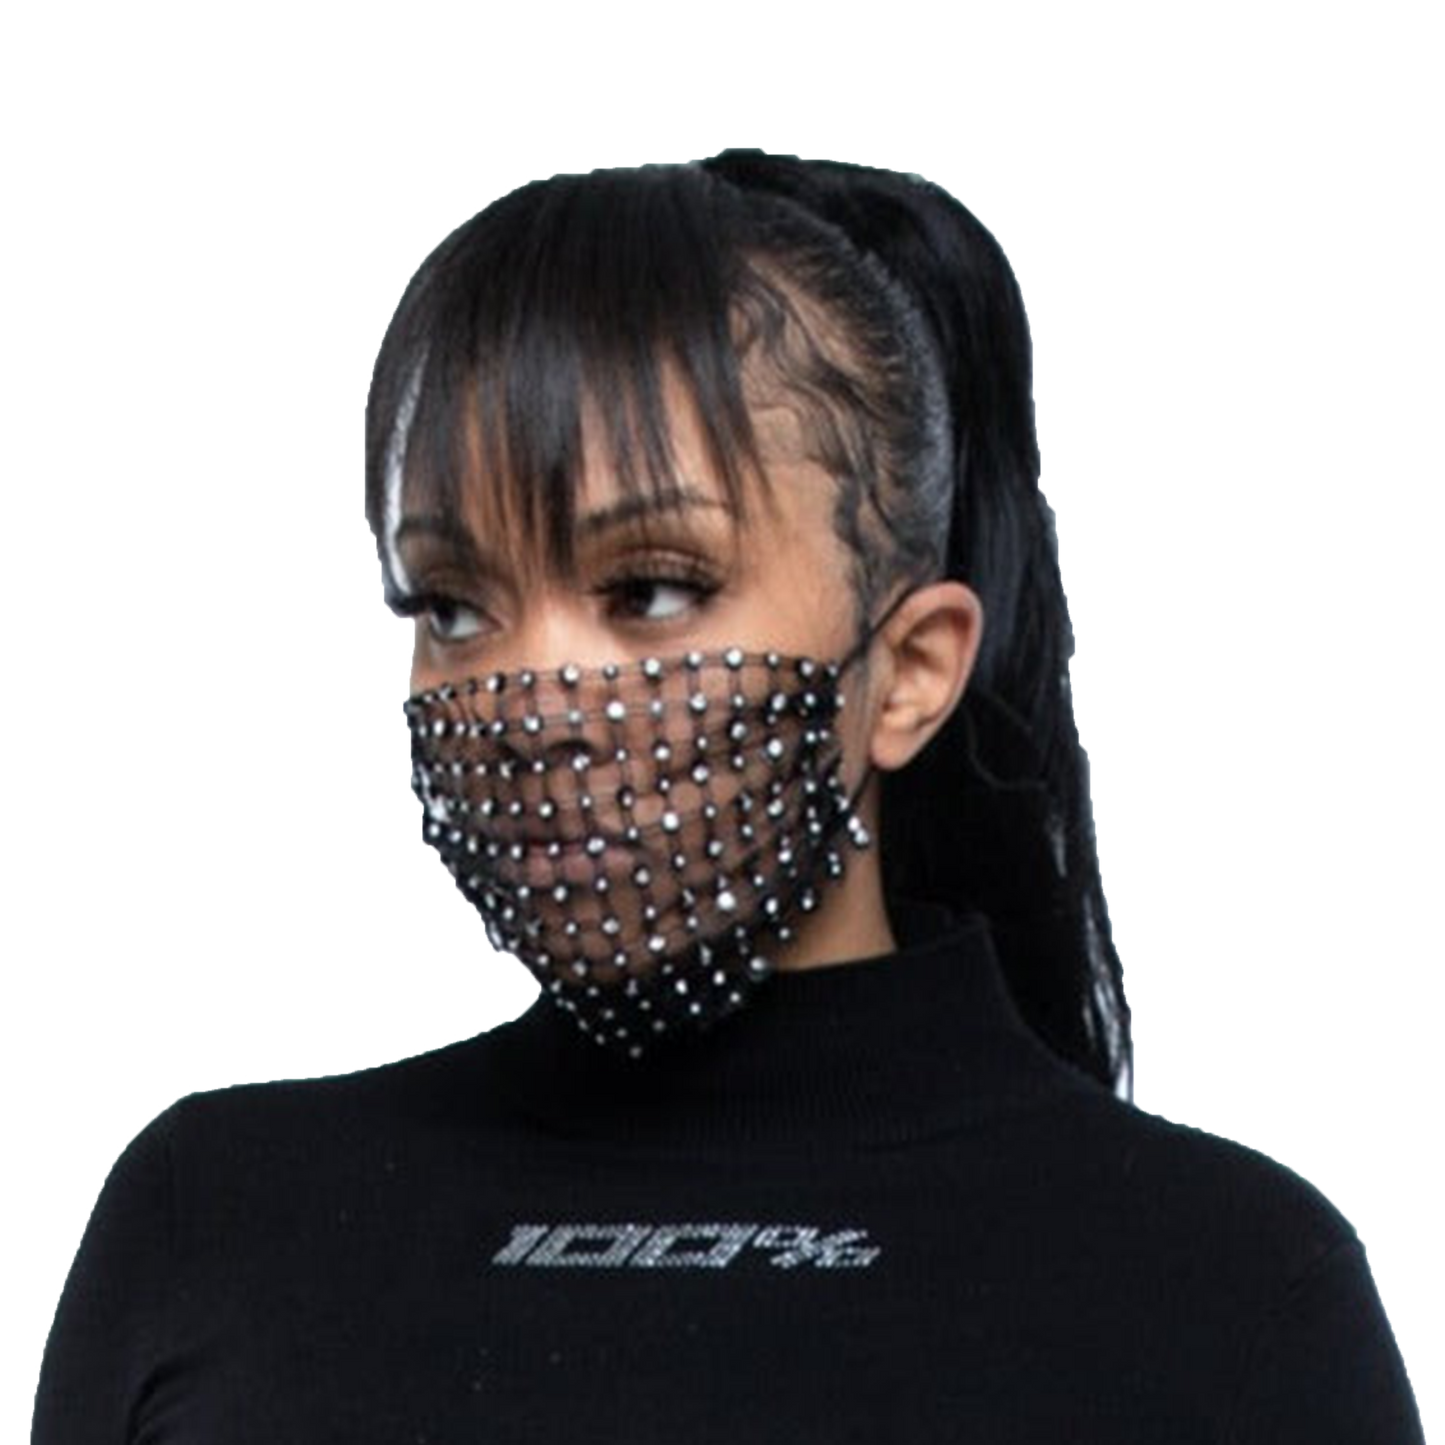 See Through Bedazzled Face Mask